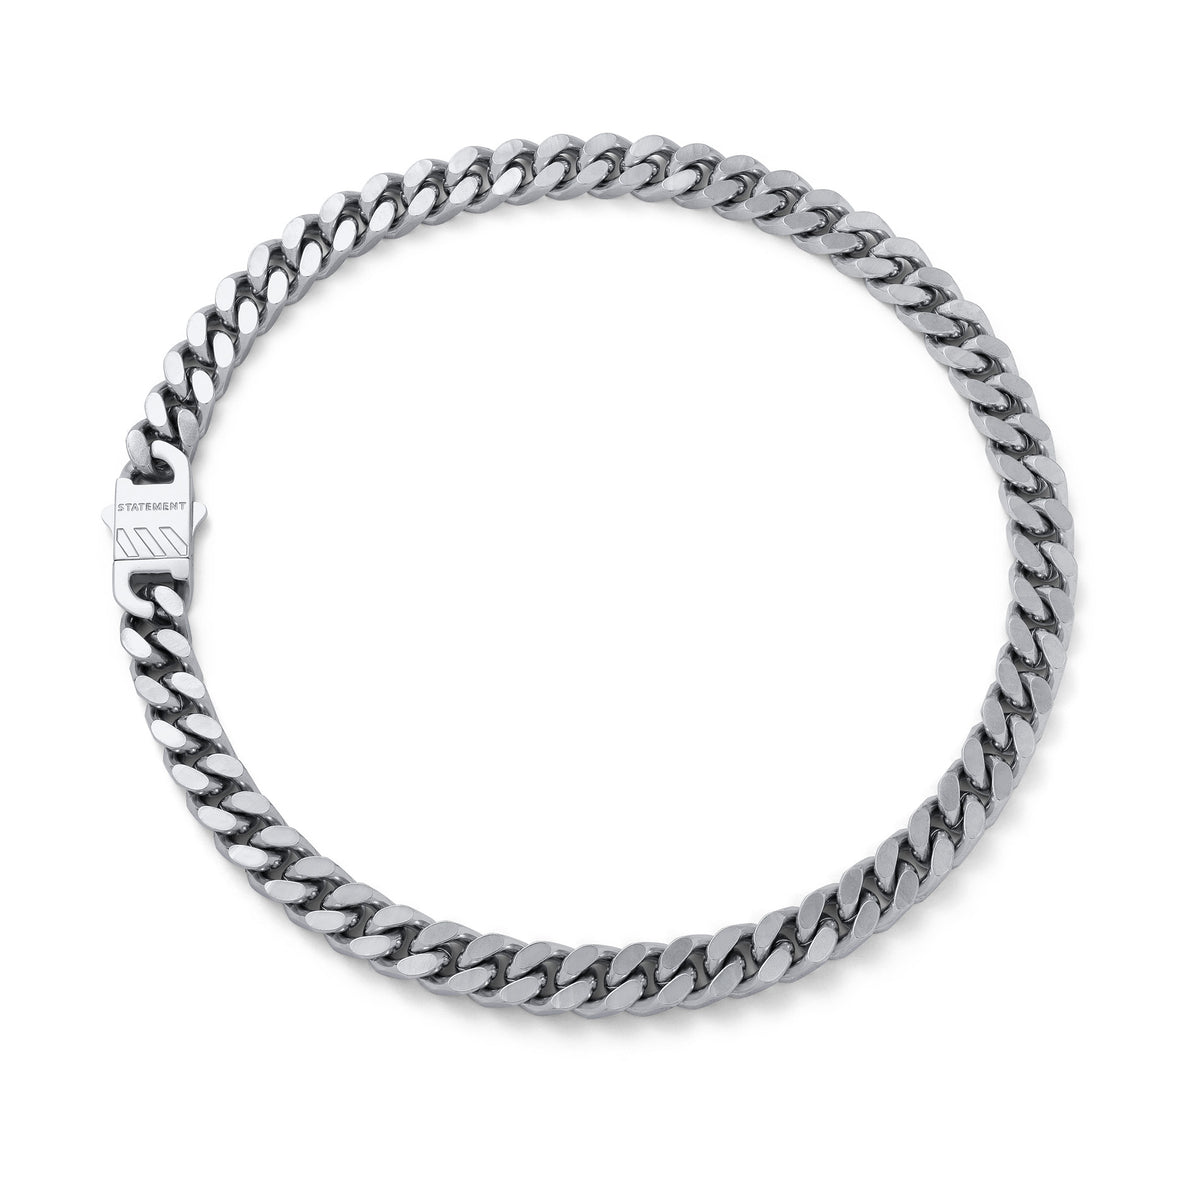 11mm cuban link necklace chain by statement collective